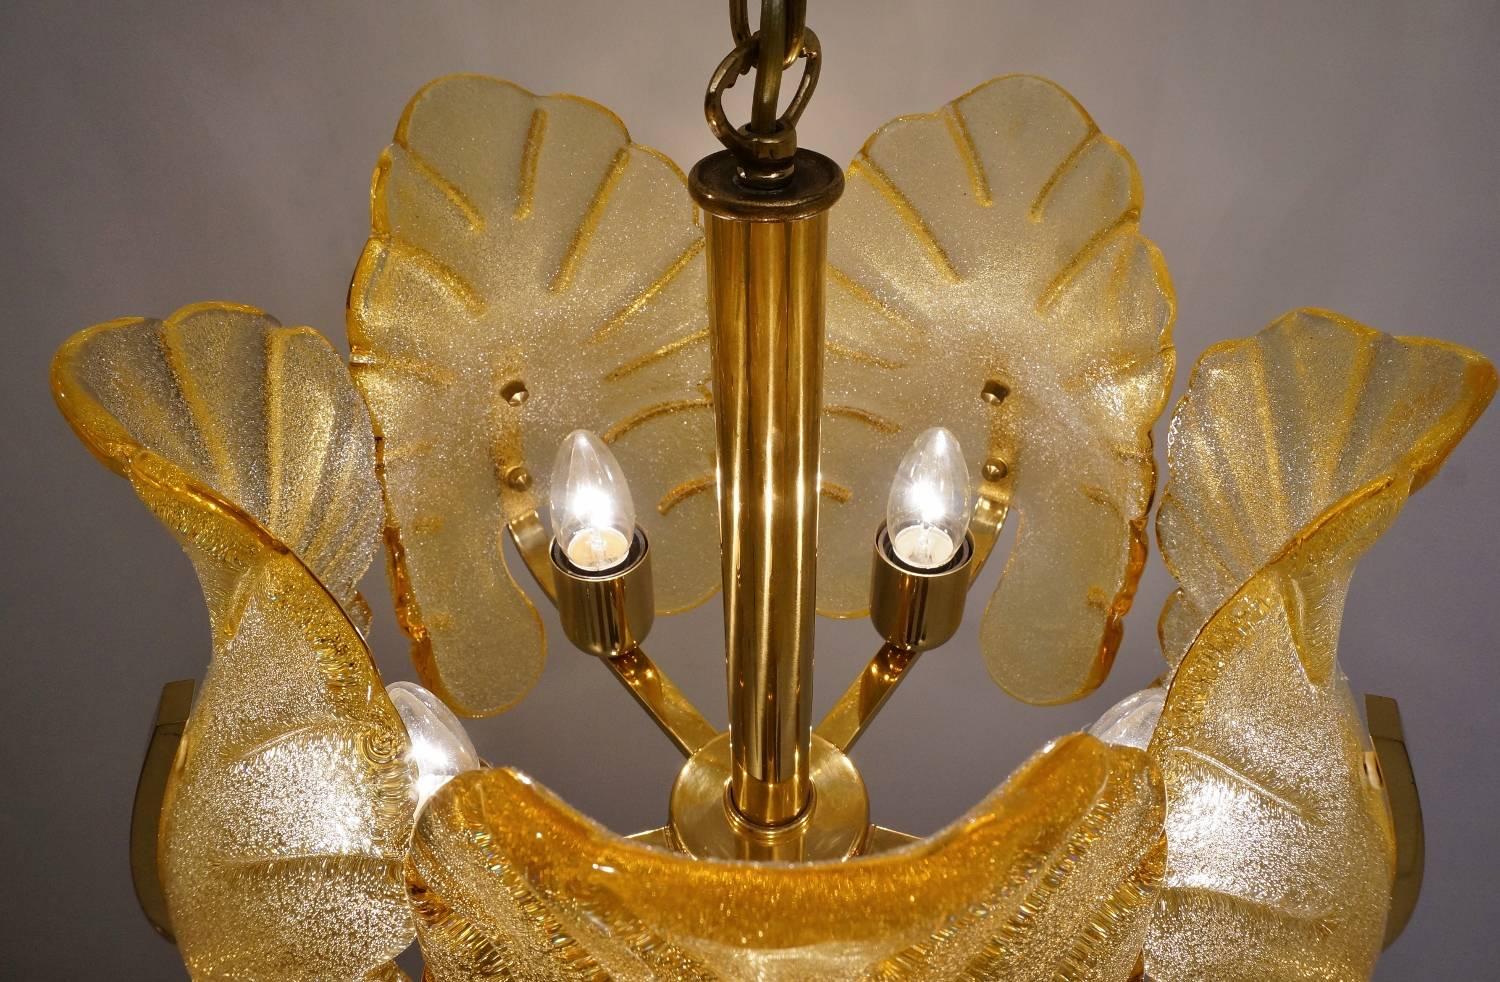 Brass Carl Fagerlund Orrefors Chandeliers, a Matching Pair, circa 1960